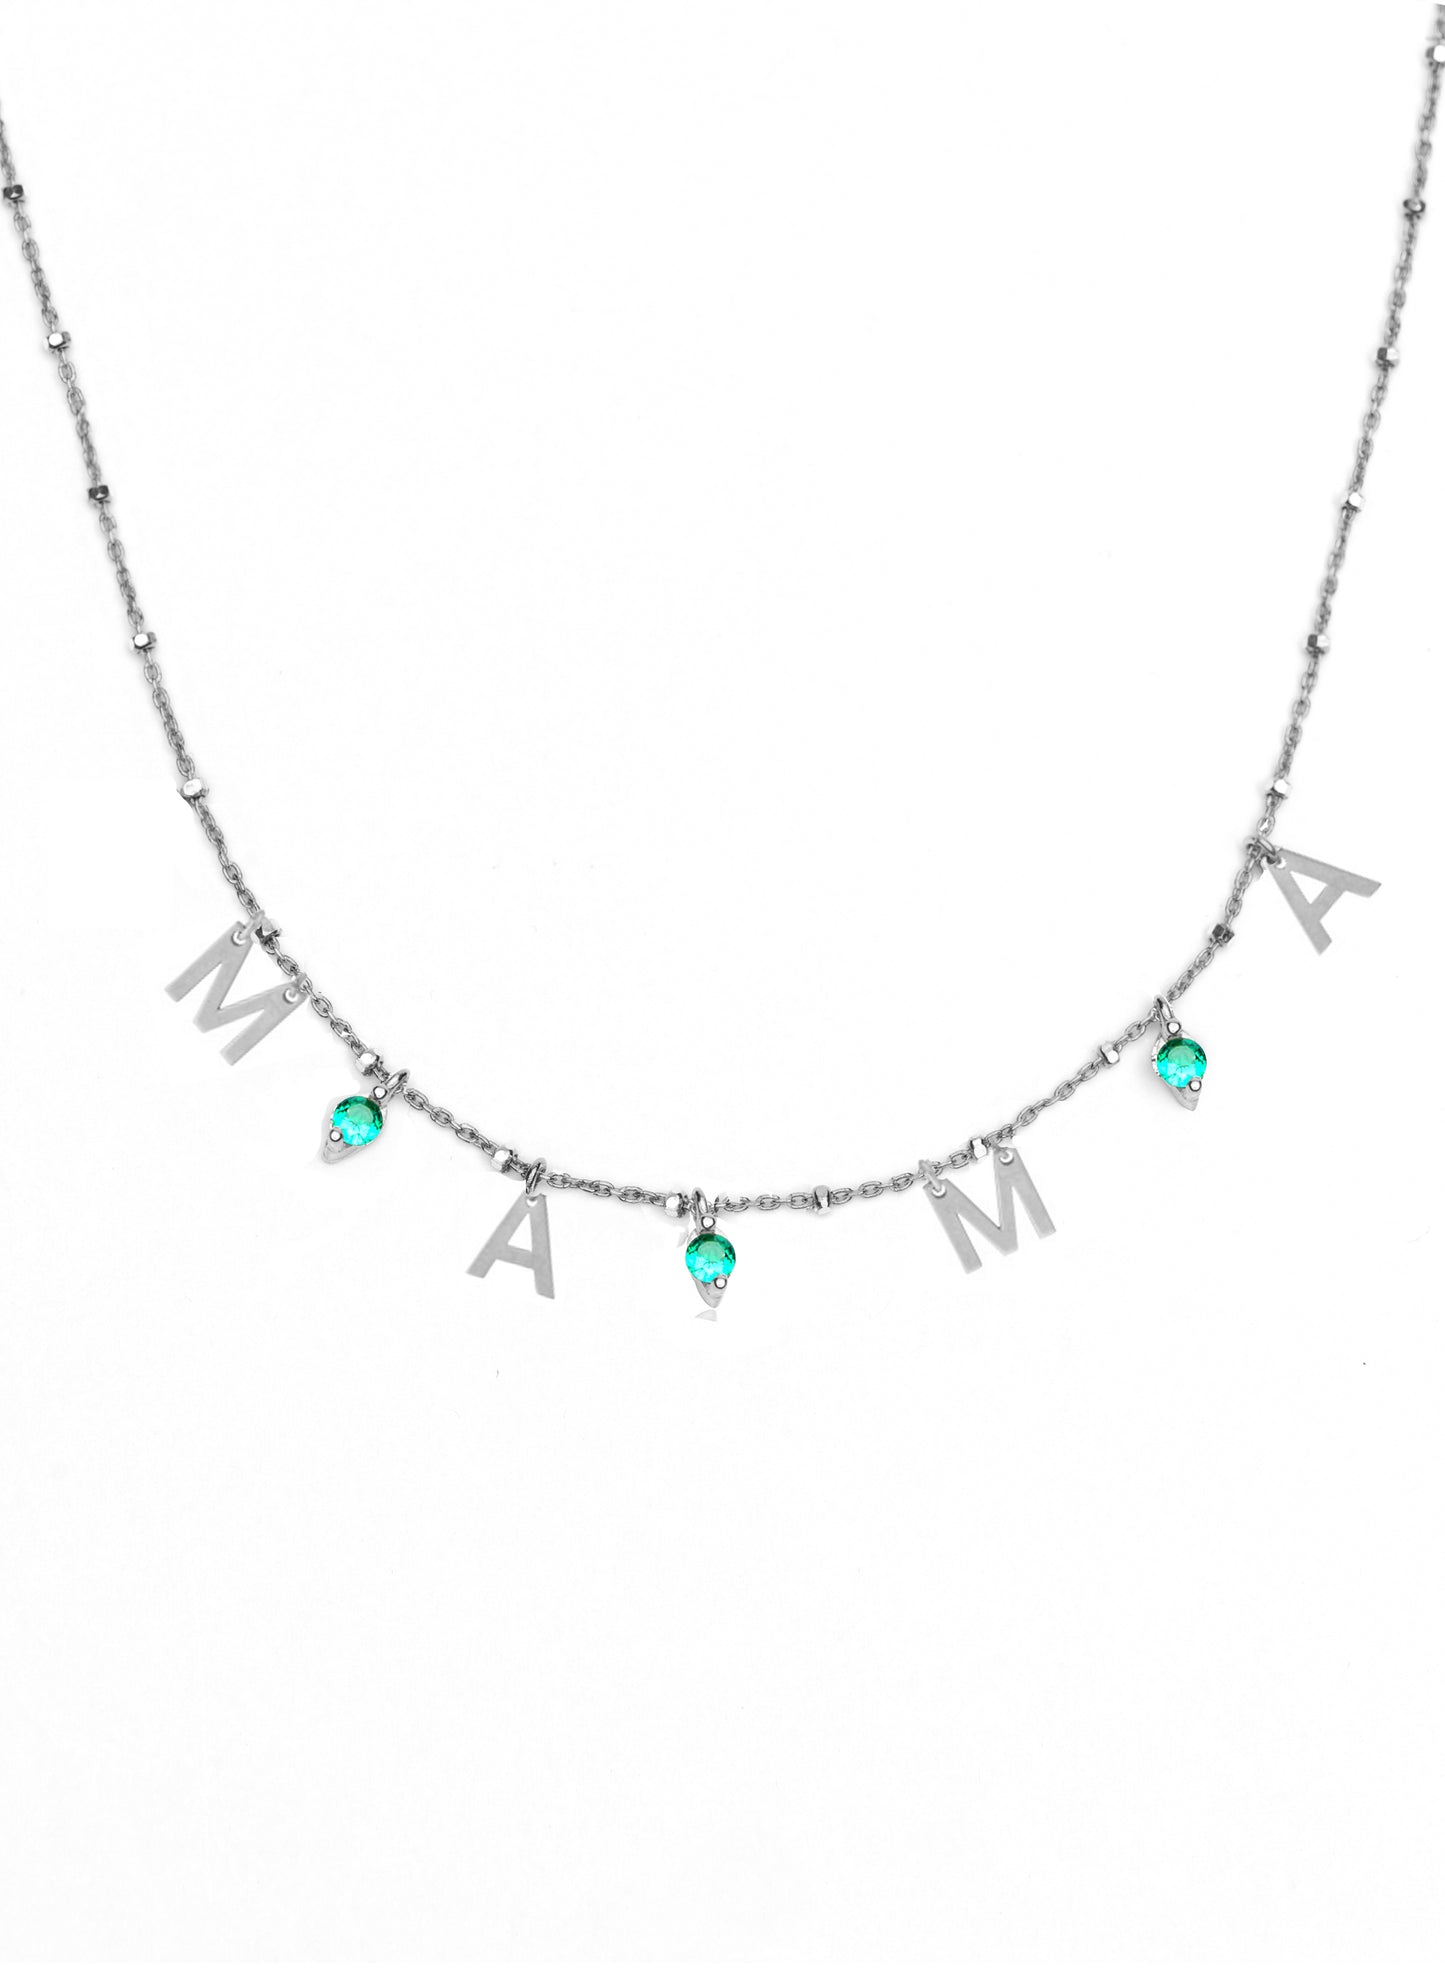 Mama necklace with emerald stone - Silver Rhodium Plated